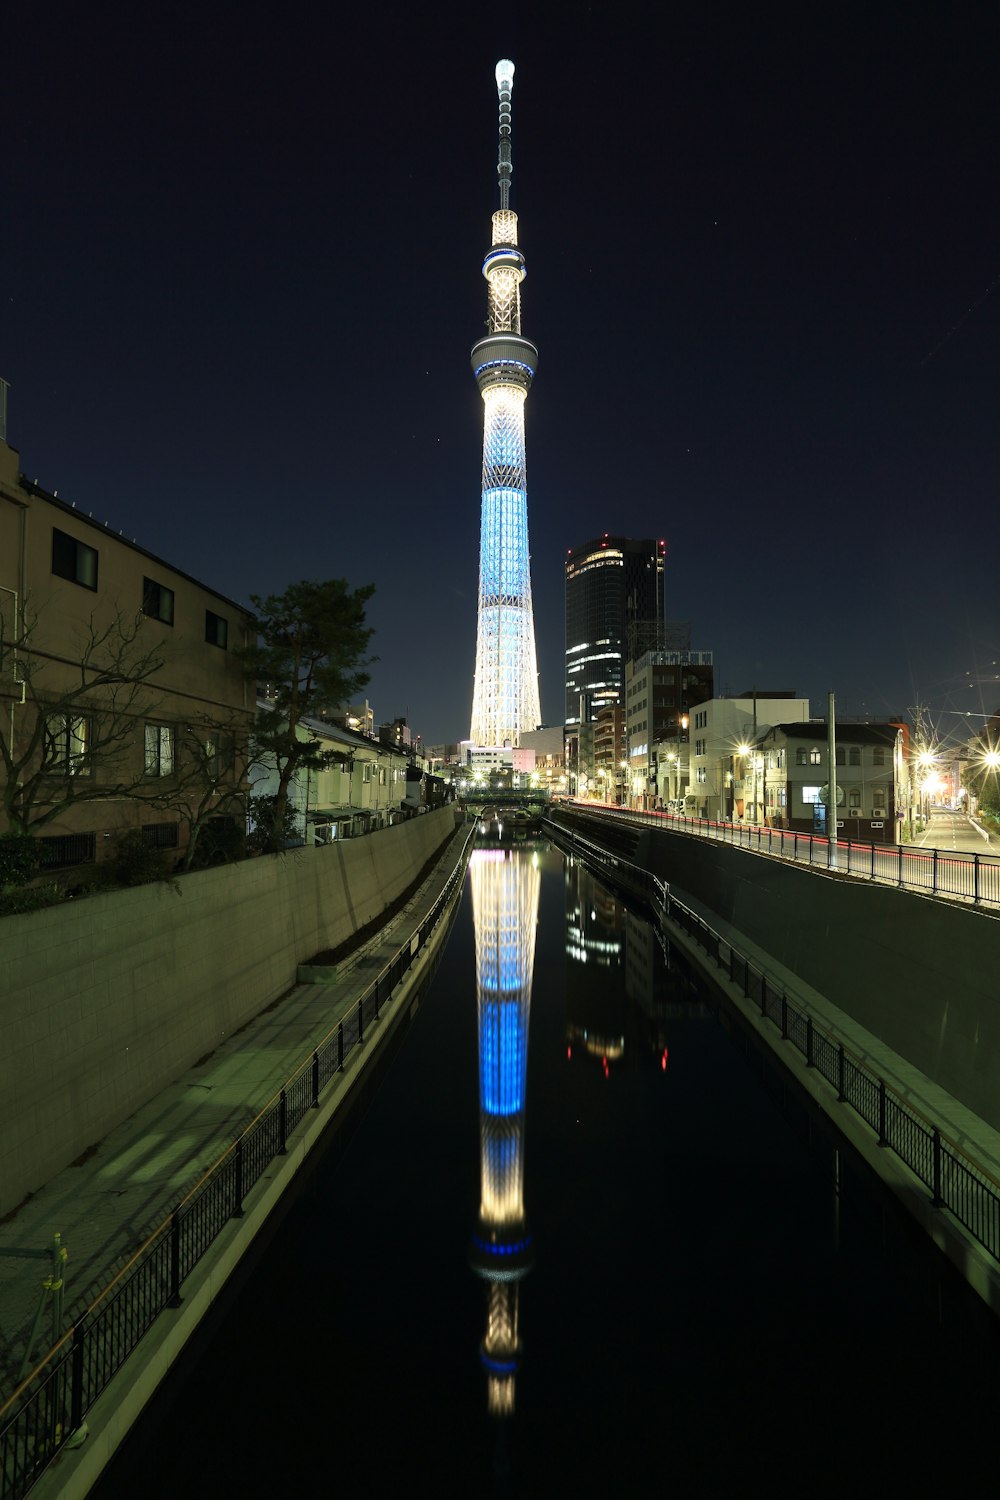 blue and white lighted tower during night time